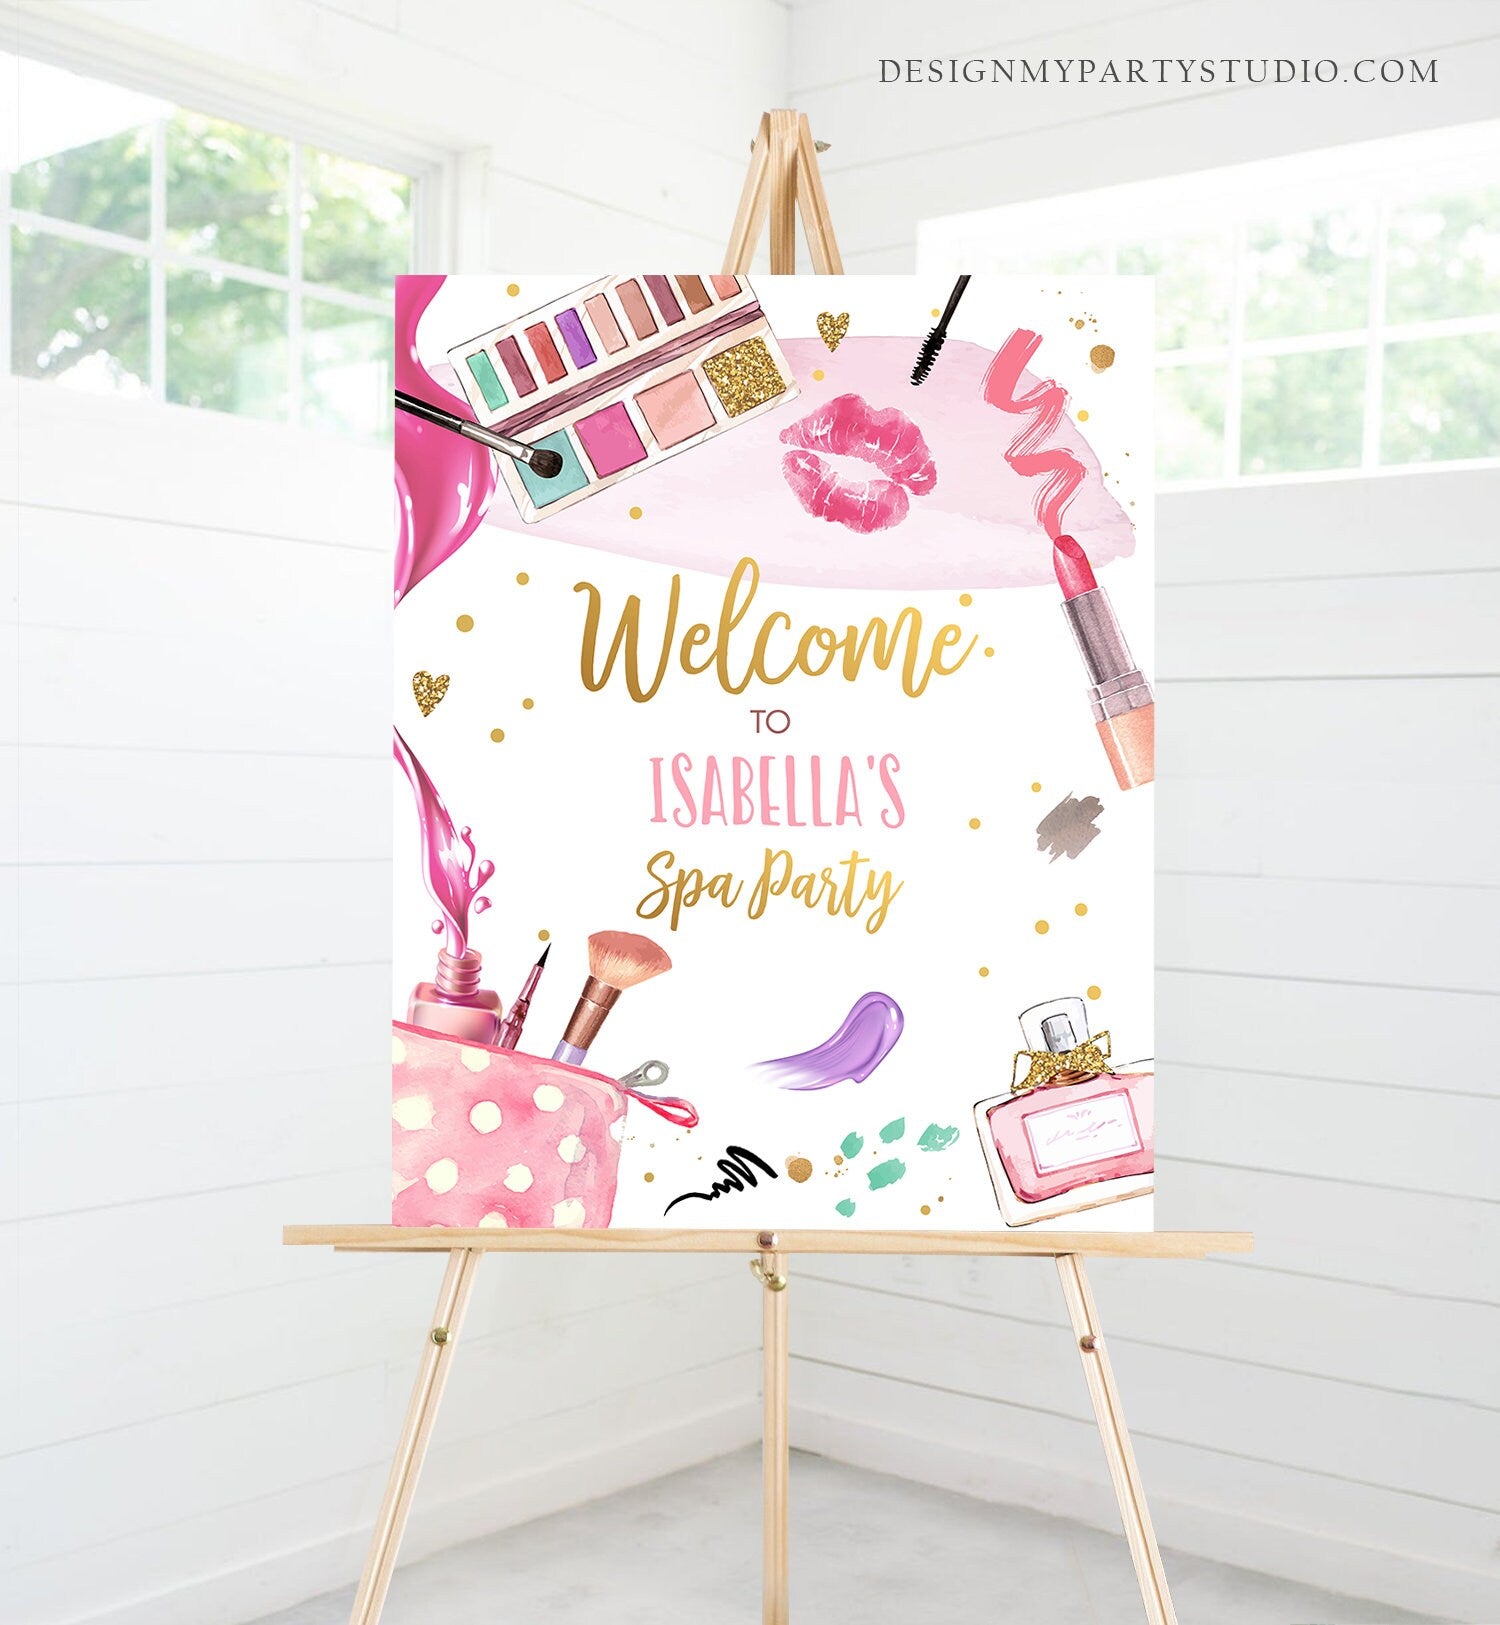 Editable Spa Party Birthday Welcome Sign Glamour Party Spa Birthday Decor Girl Pink and Gold Makeup Party Template Corjl PRINTABLE 0420